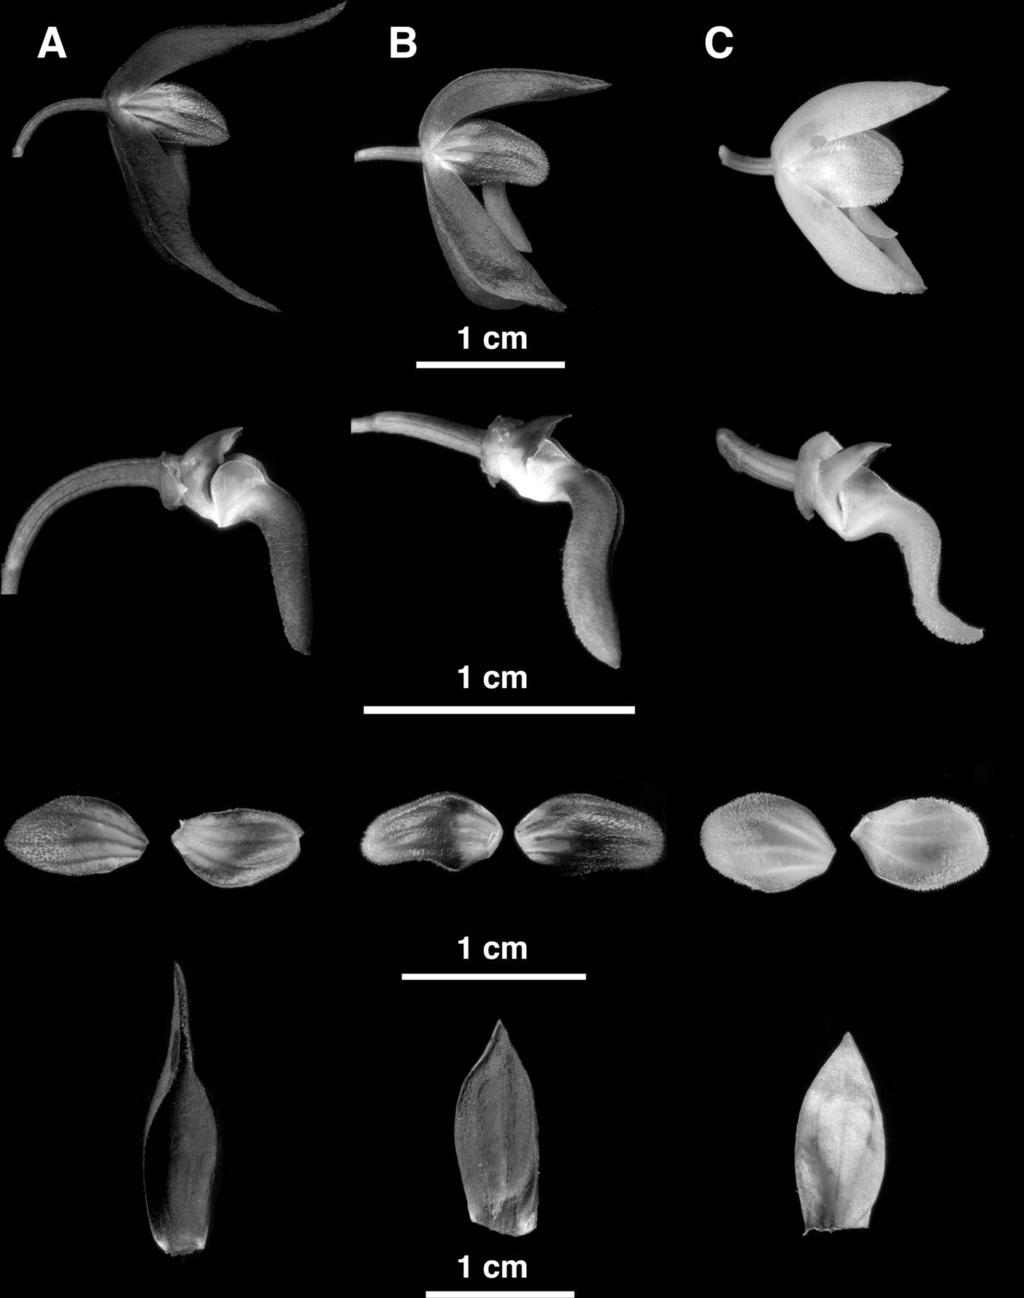 2013] KARREMANS AND BOGARÍN: NEW SPECIES OF DRACONTIA 313 Fig. 4. Comparison of (1) flowers, (2) column and lip, (3) petals, and (4) dorsal sepal, as seen from top to bottom. A. Dracontia hydra Karremans & C.